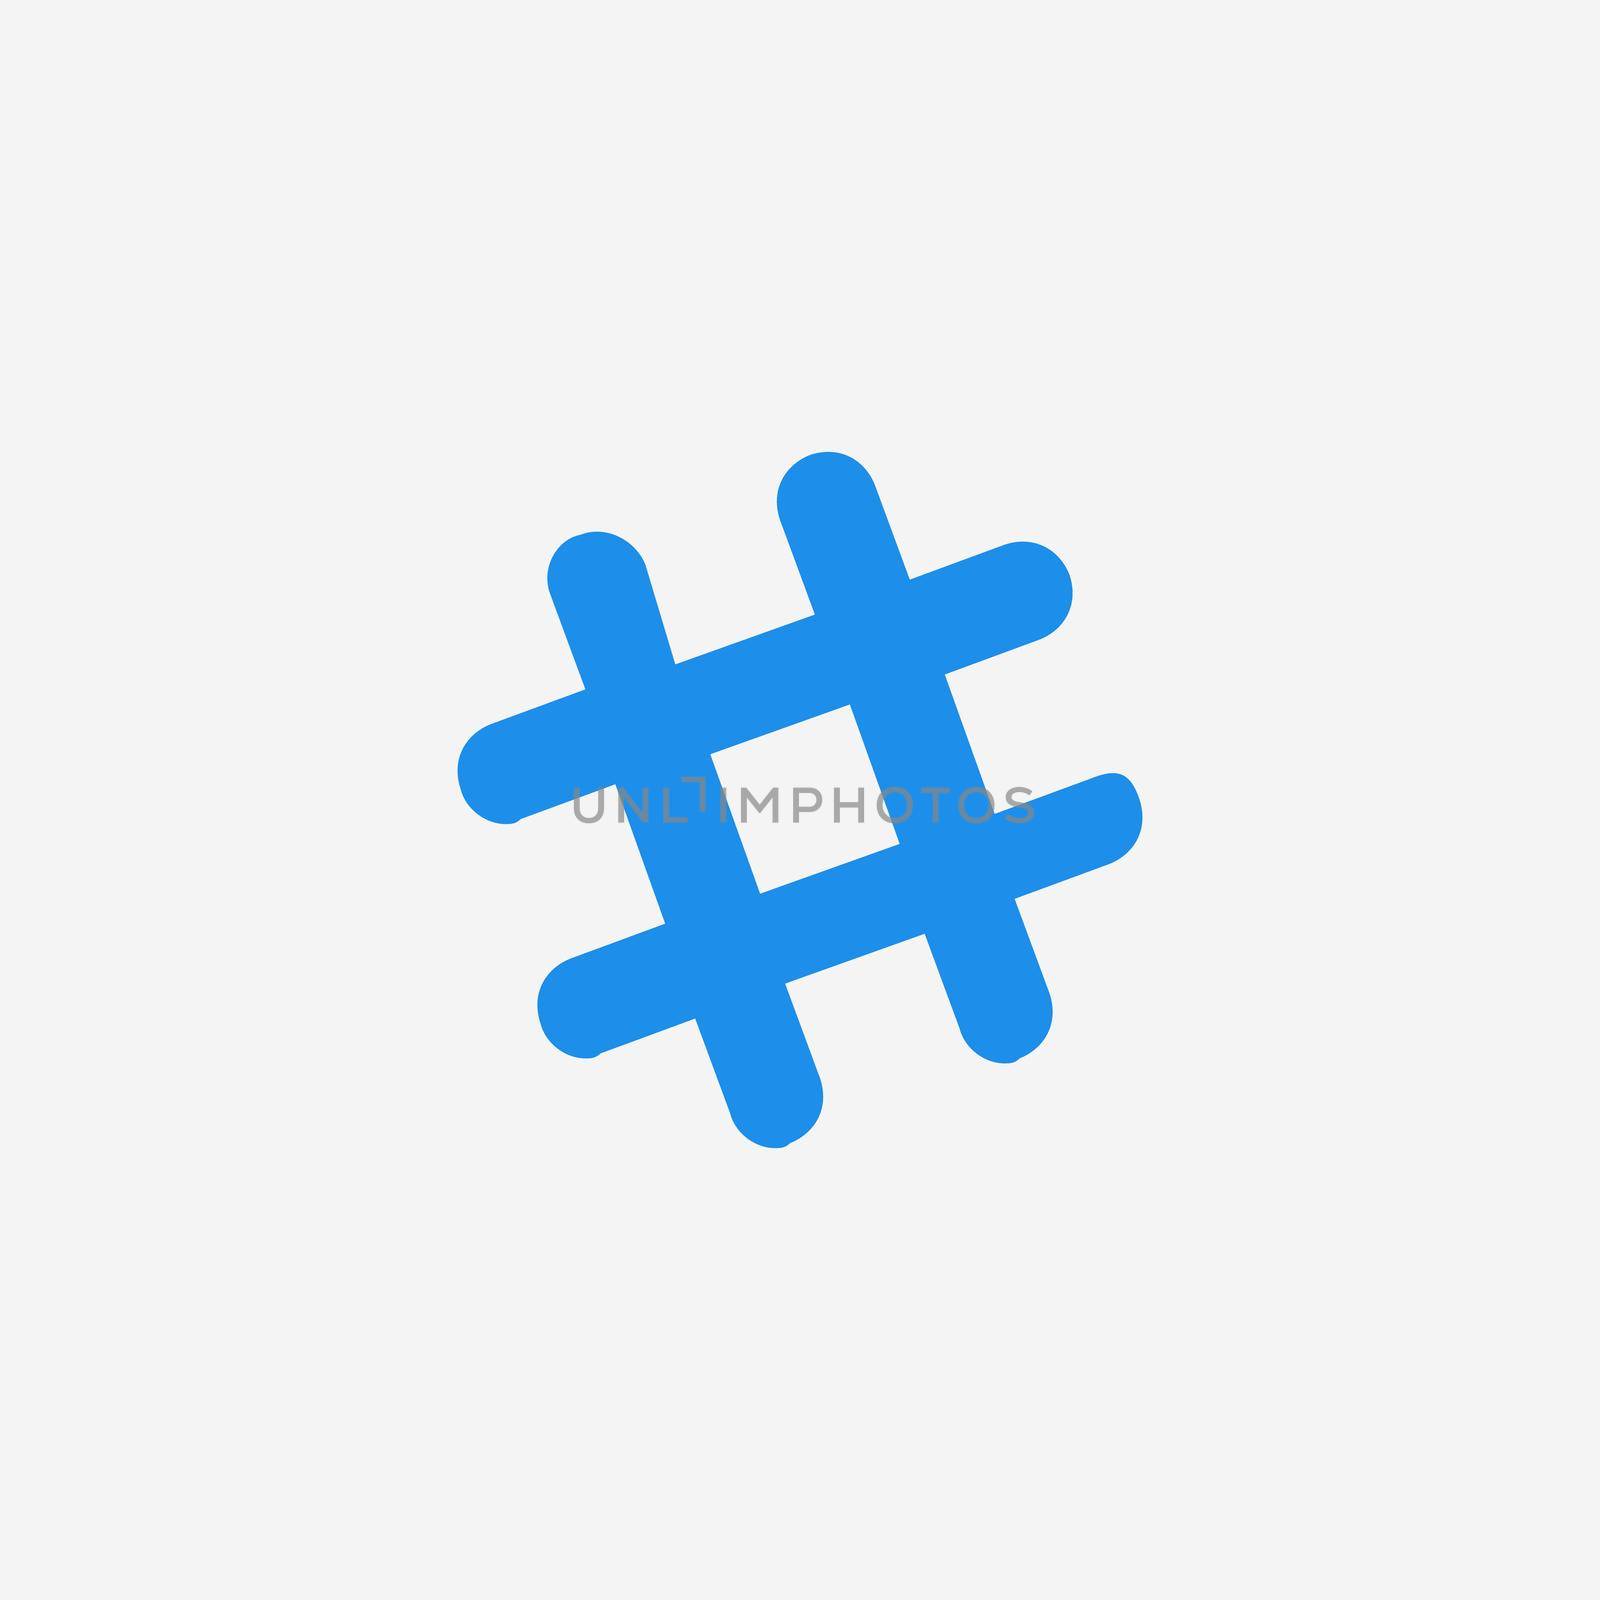 Hash tag sign icon. Follow network vector illustration on white background by Kyrylov